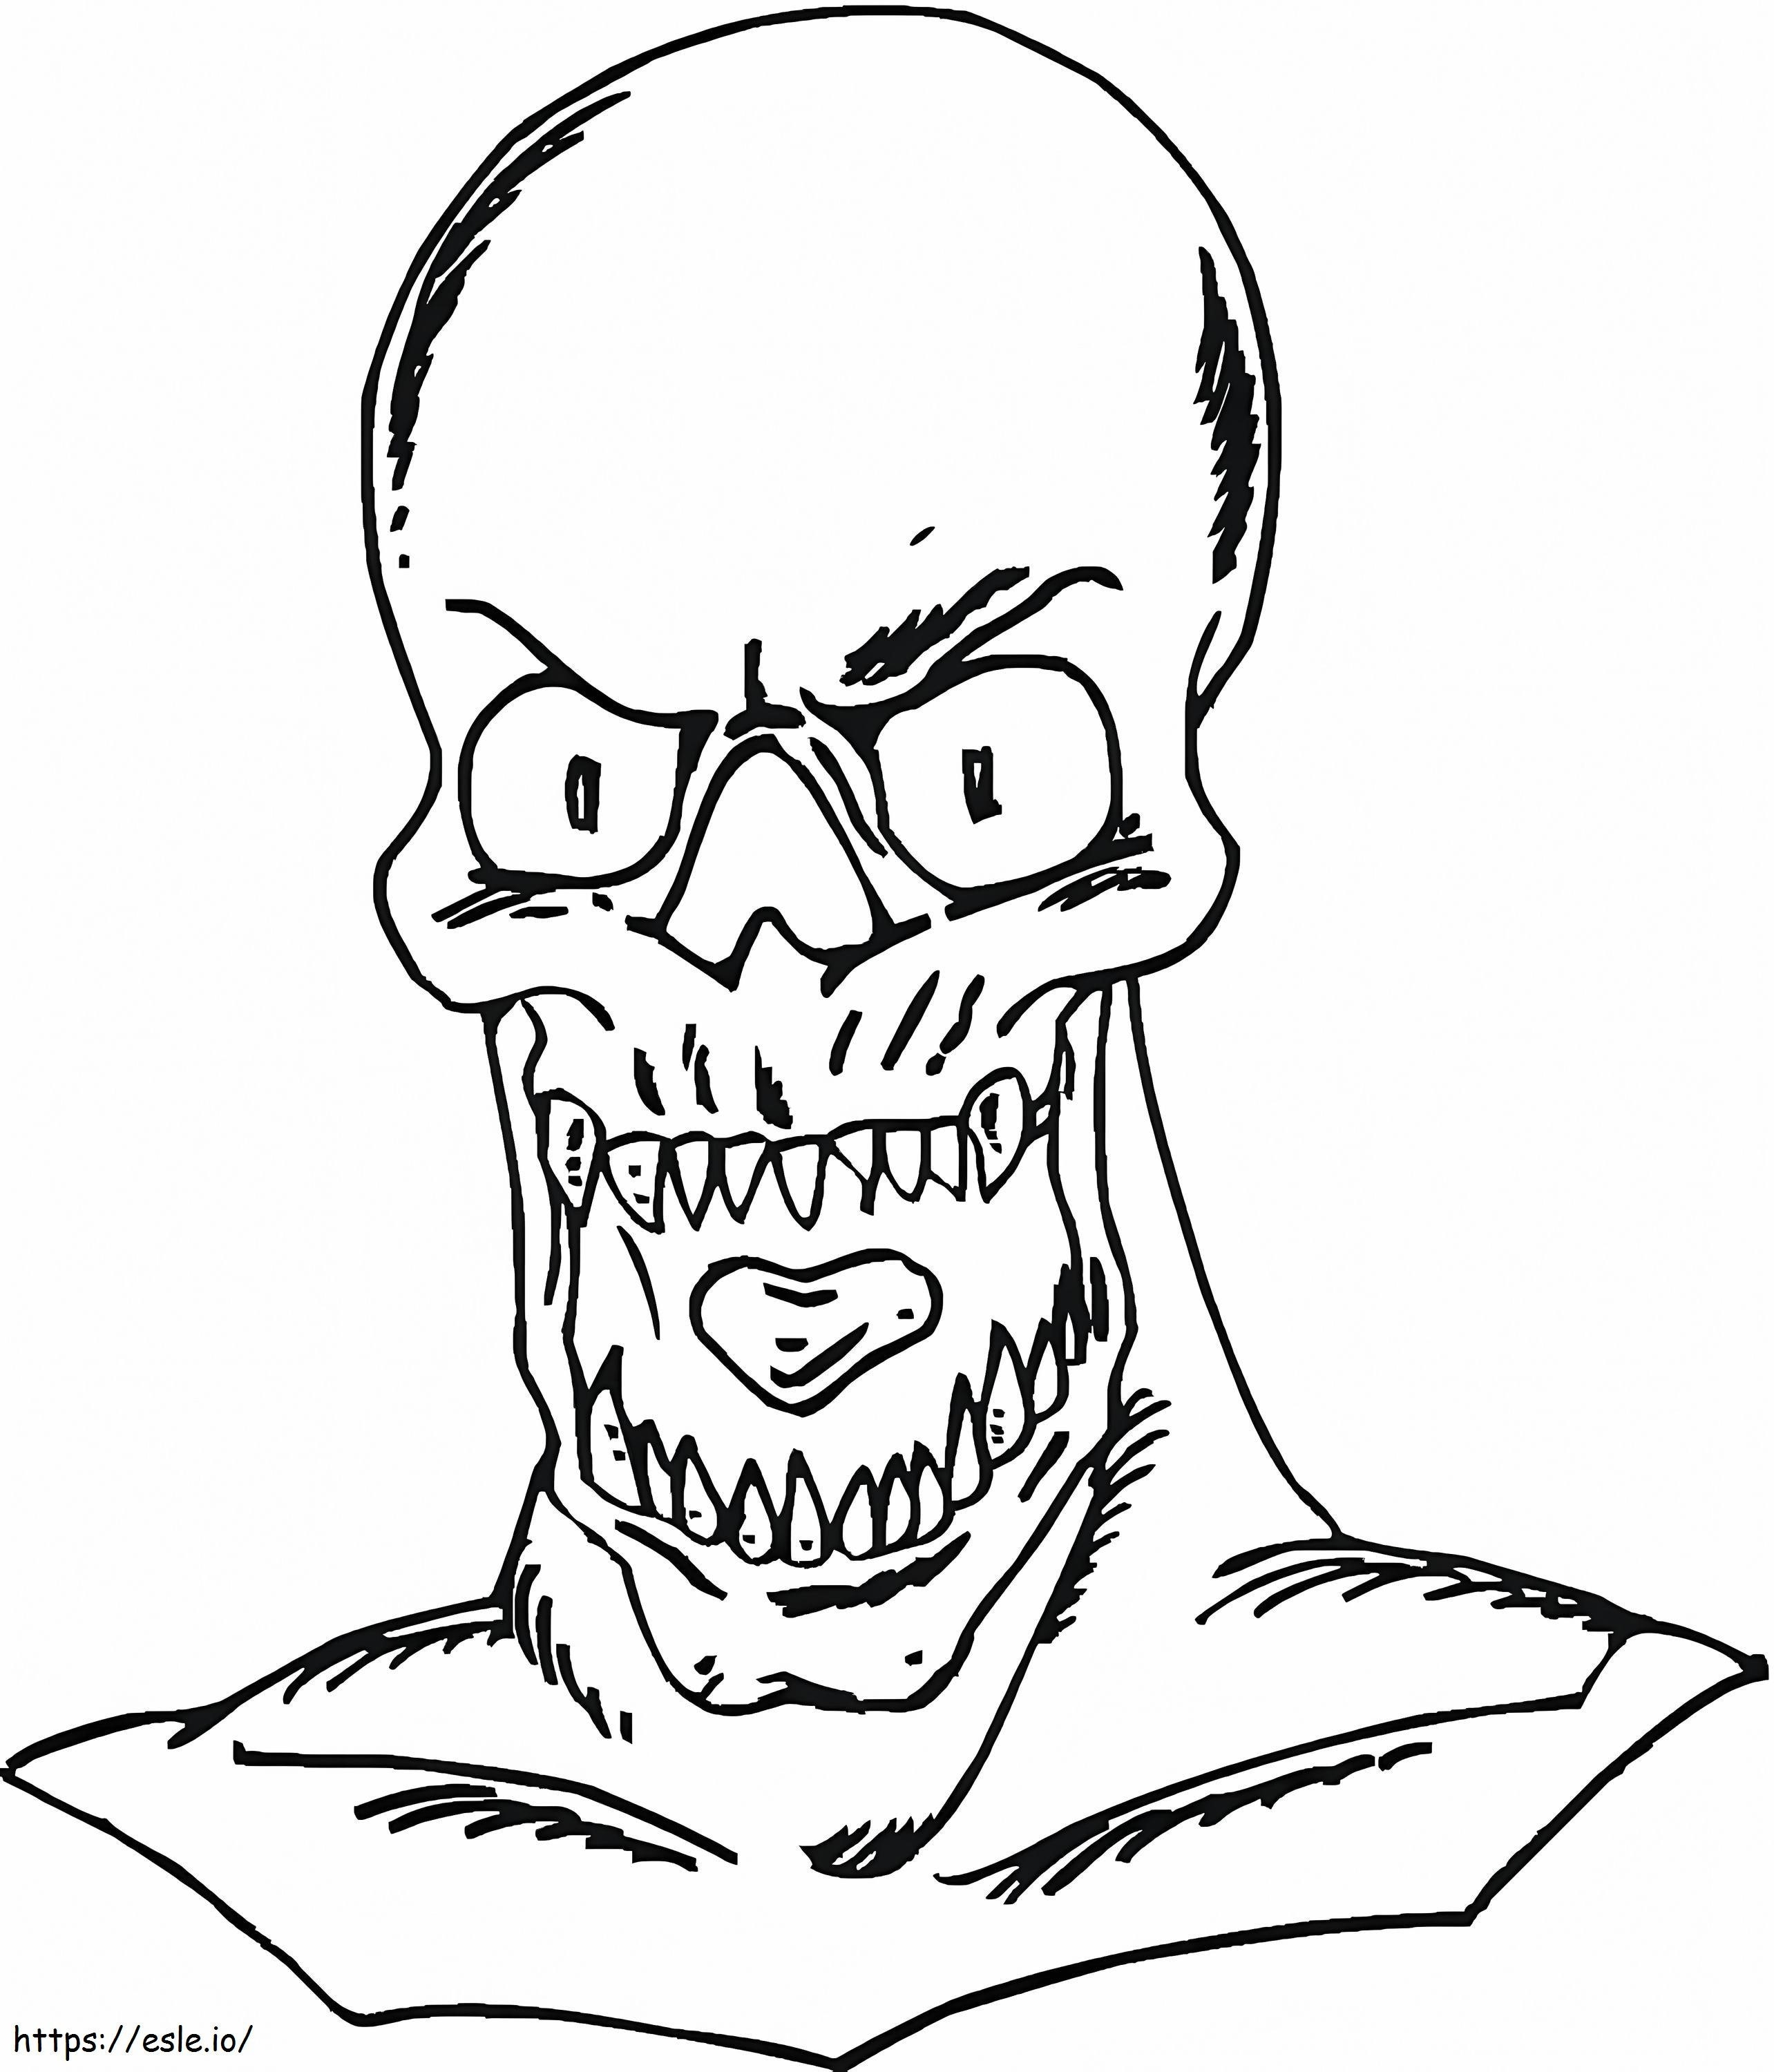 1547890833 Undead coloring page